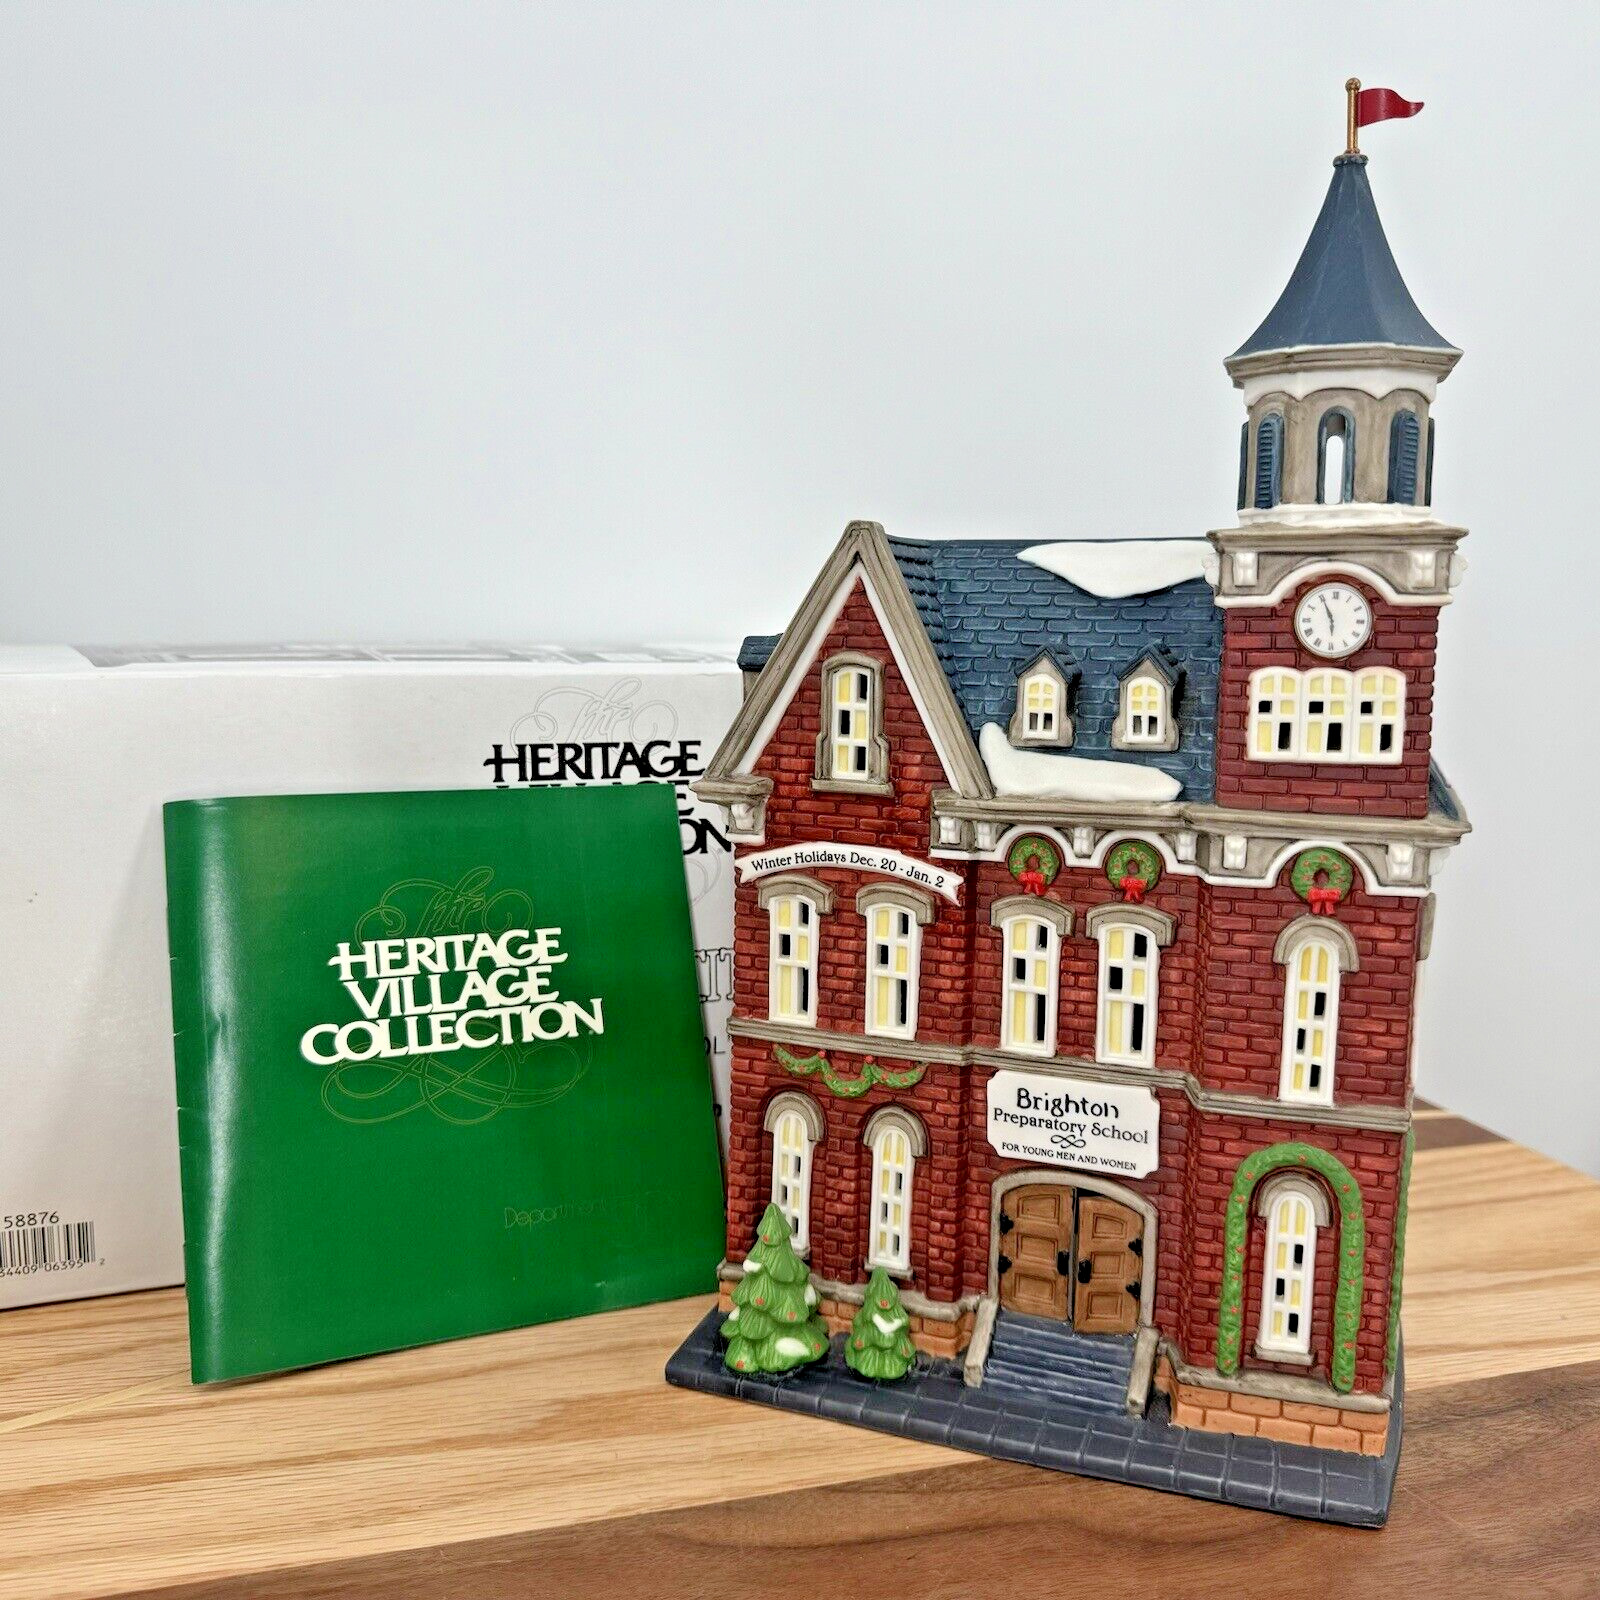 Department 56 Brighton School Christmas in the City With Box Tag 58876 Retired